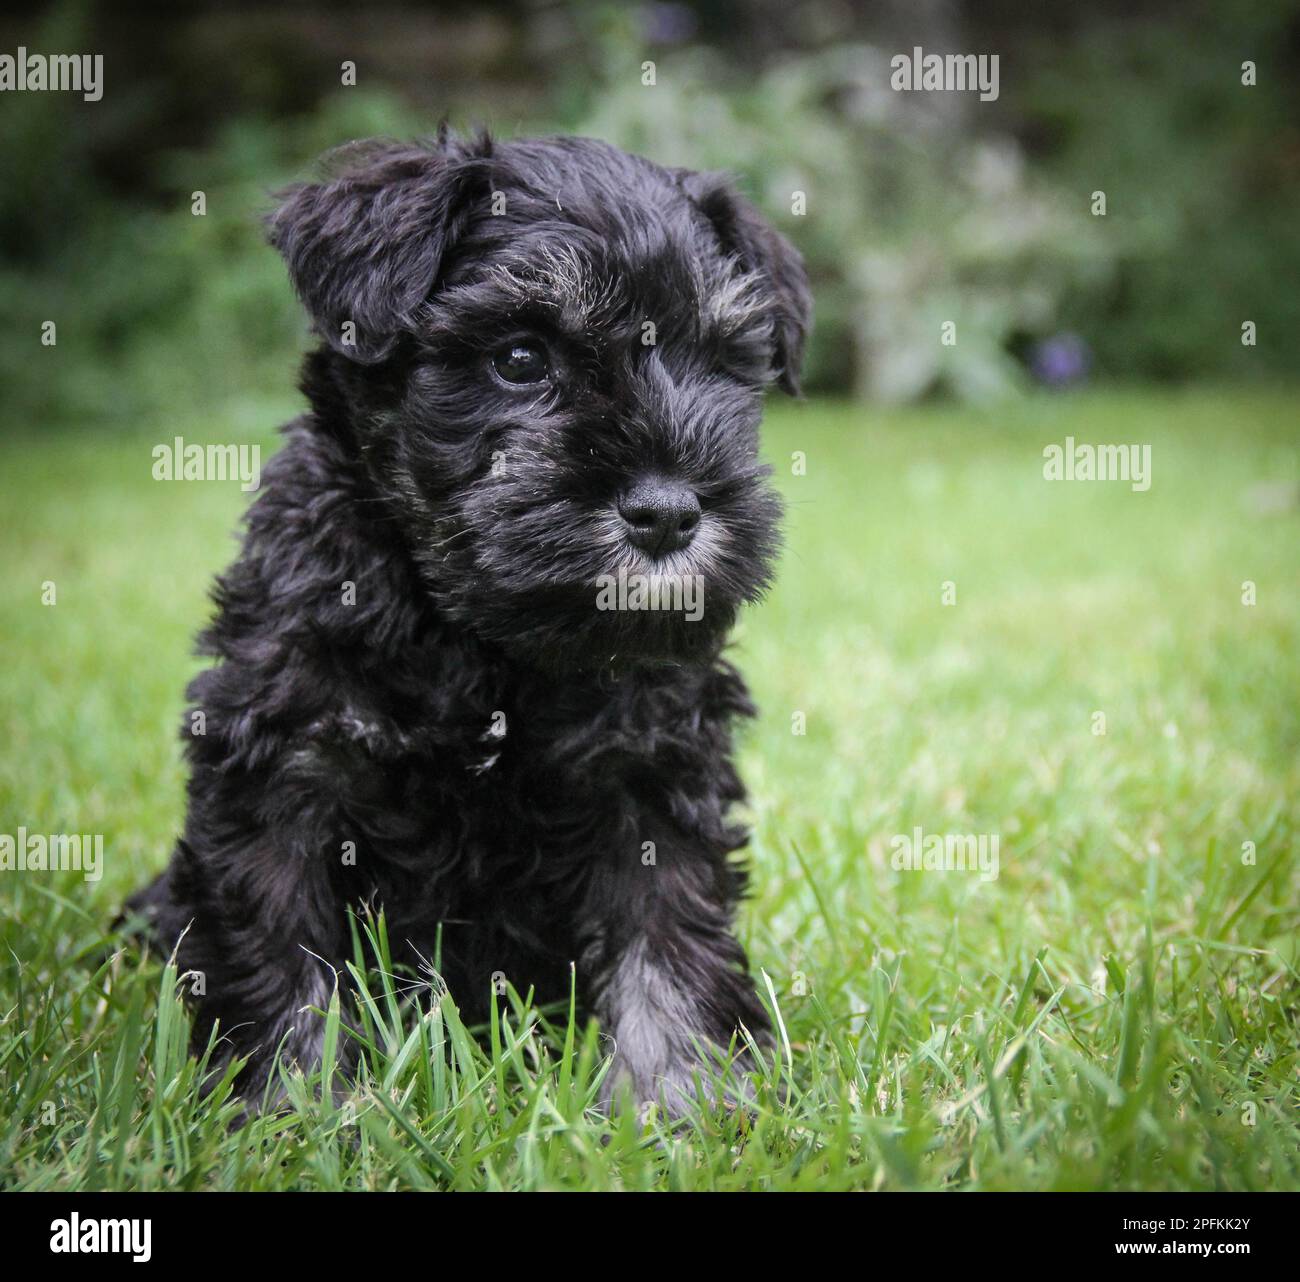 six week old small cute black miniature schnauzer puppy dog sitting in the grass in a garden in summer Stock Photo